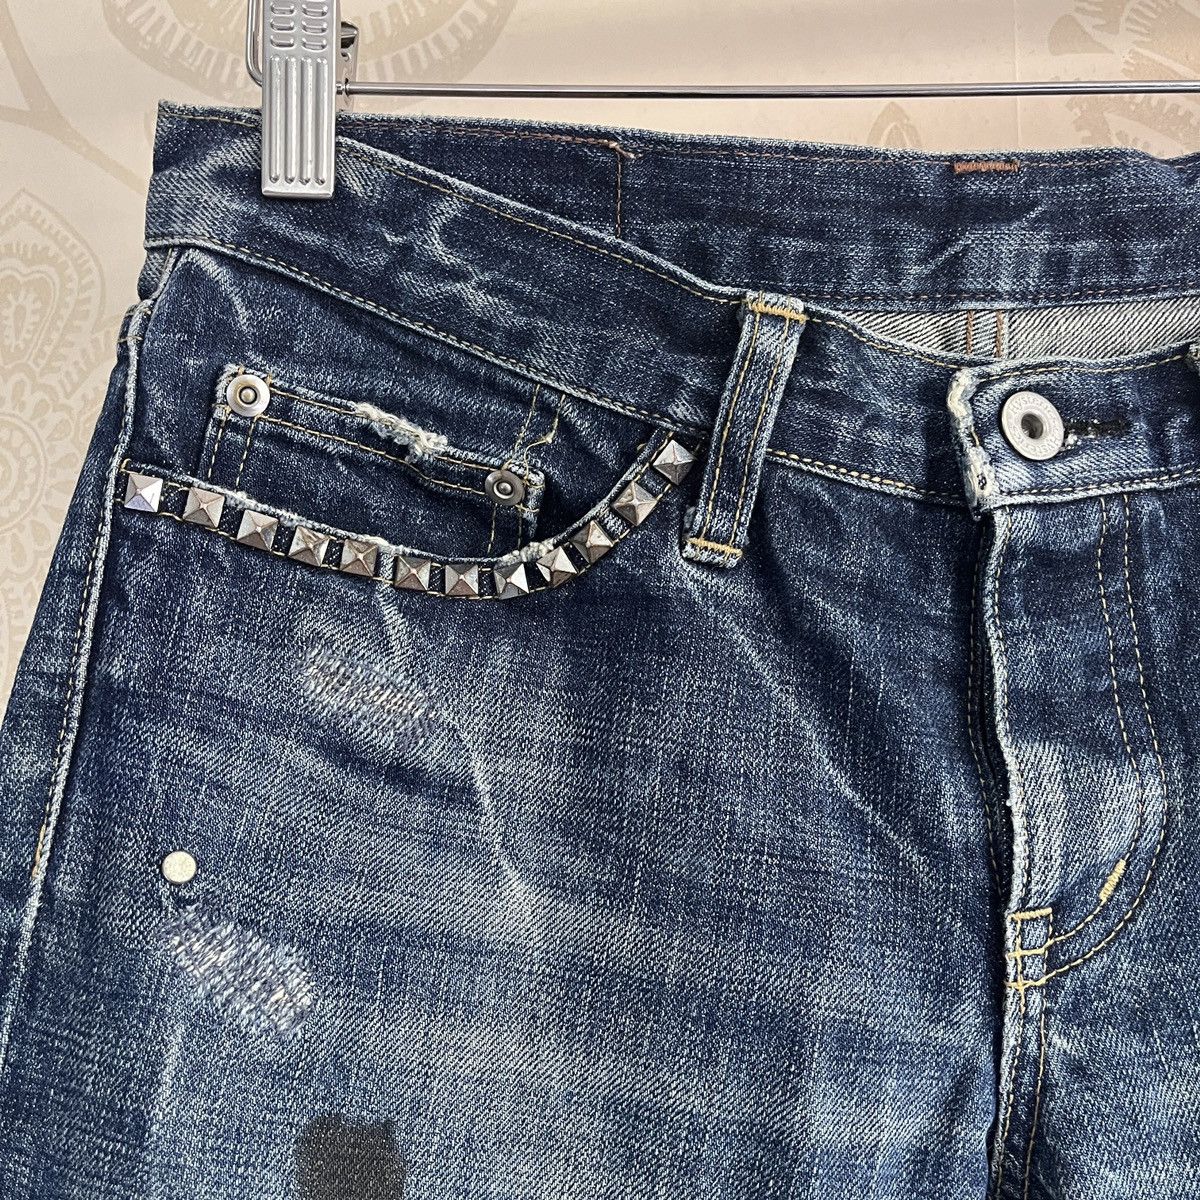 Archival Clothing - Vintage Hysteric Glamour Buttons Denim Jeans - 9